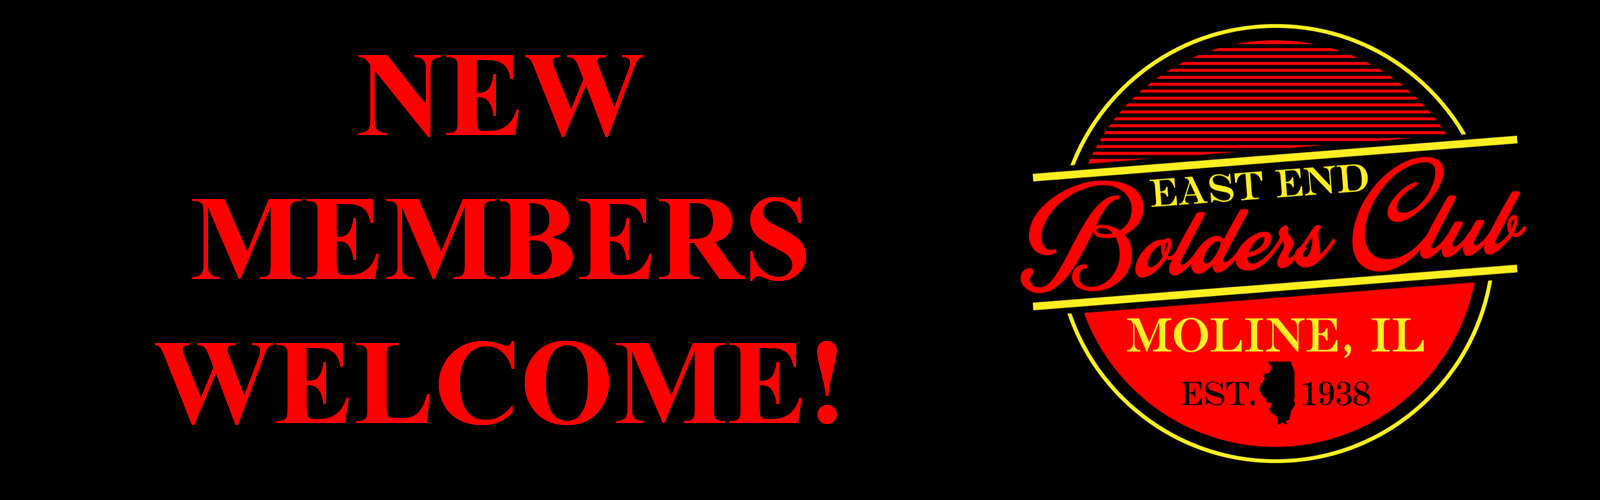 new member welcome banner